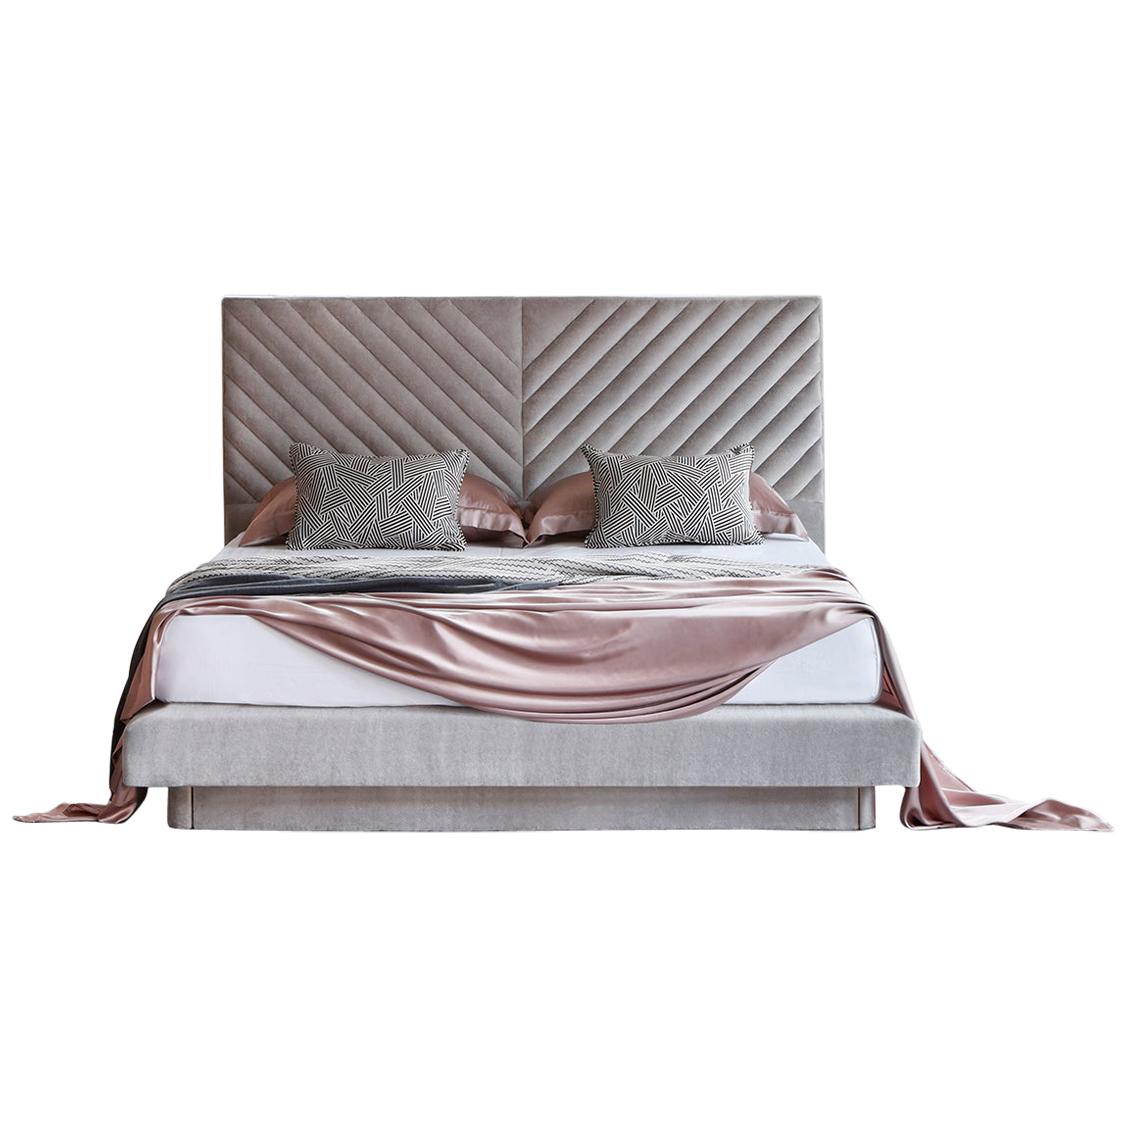 Bespoke Stella Headboard and Nº4 Bed Set, King Size, by Nicole Fuller For Sale